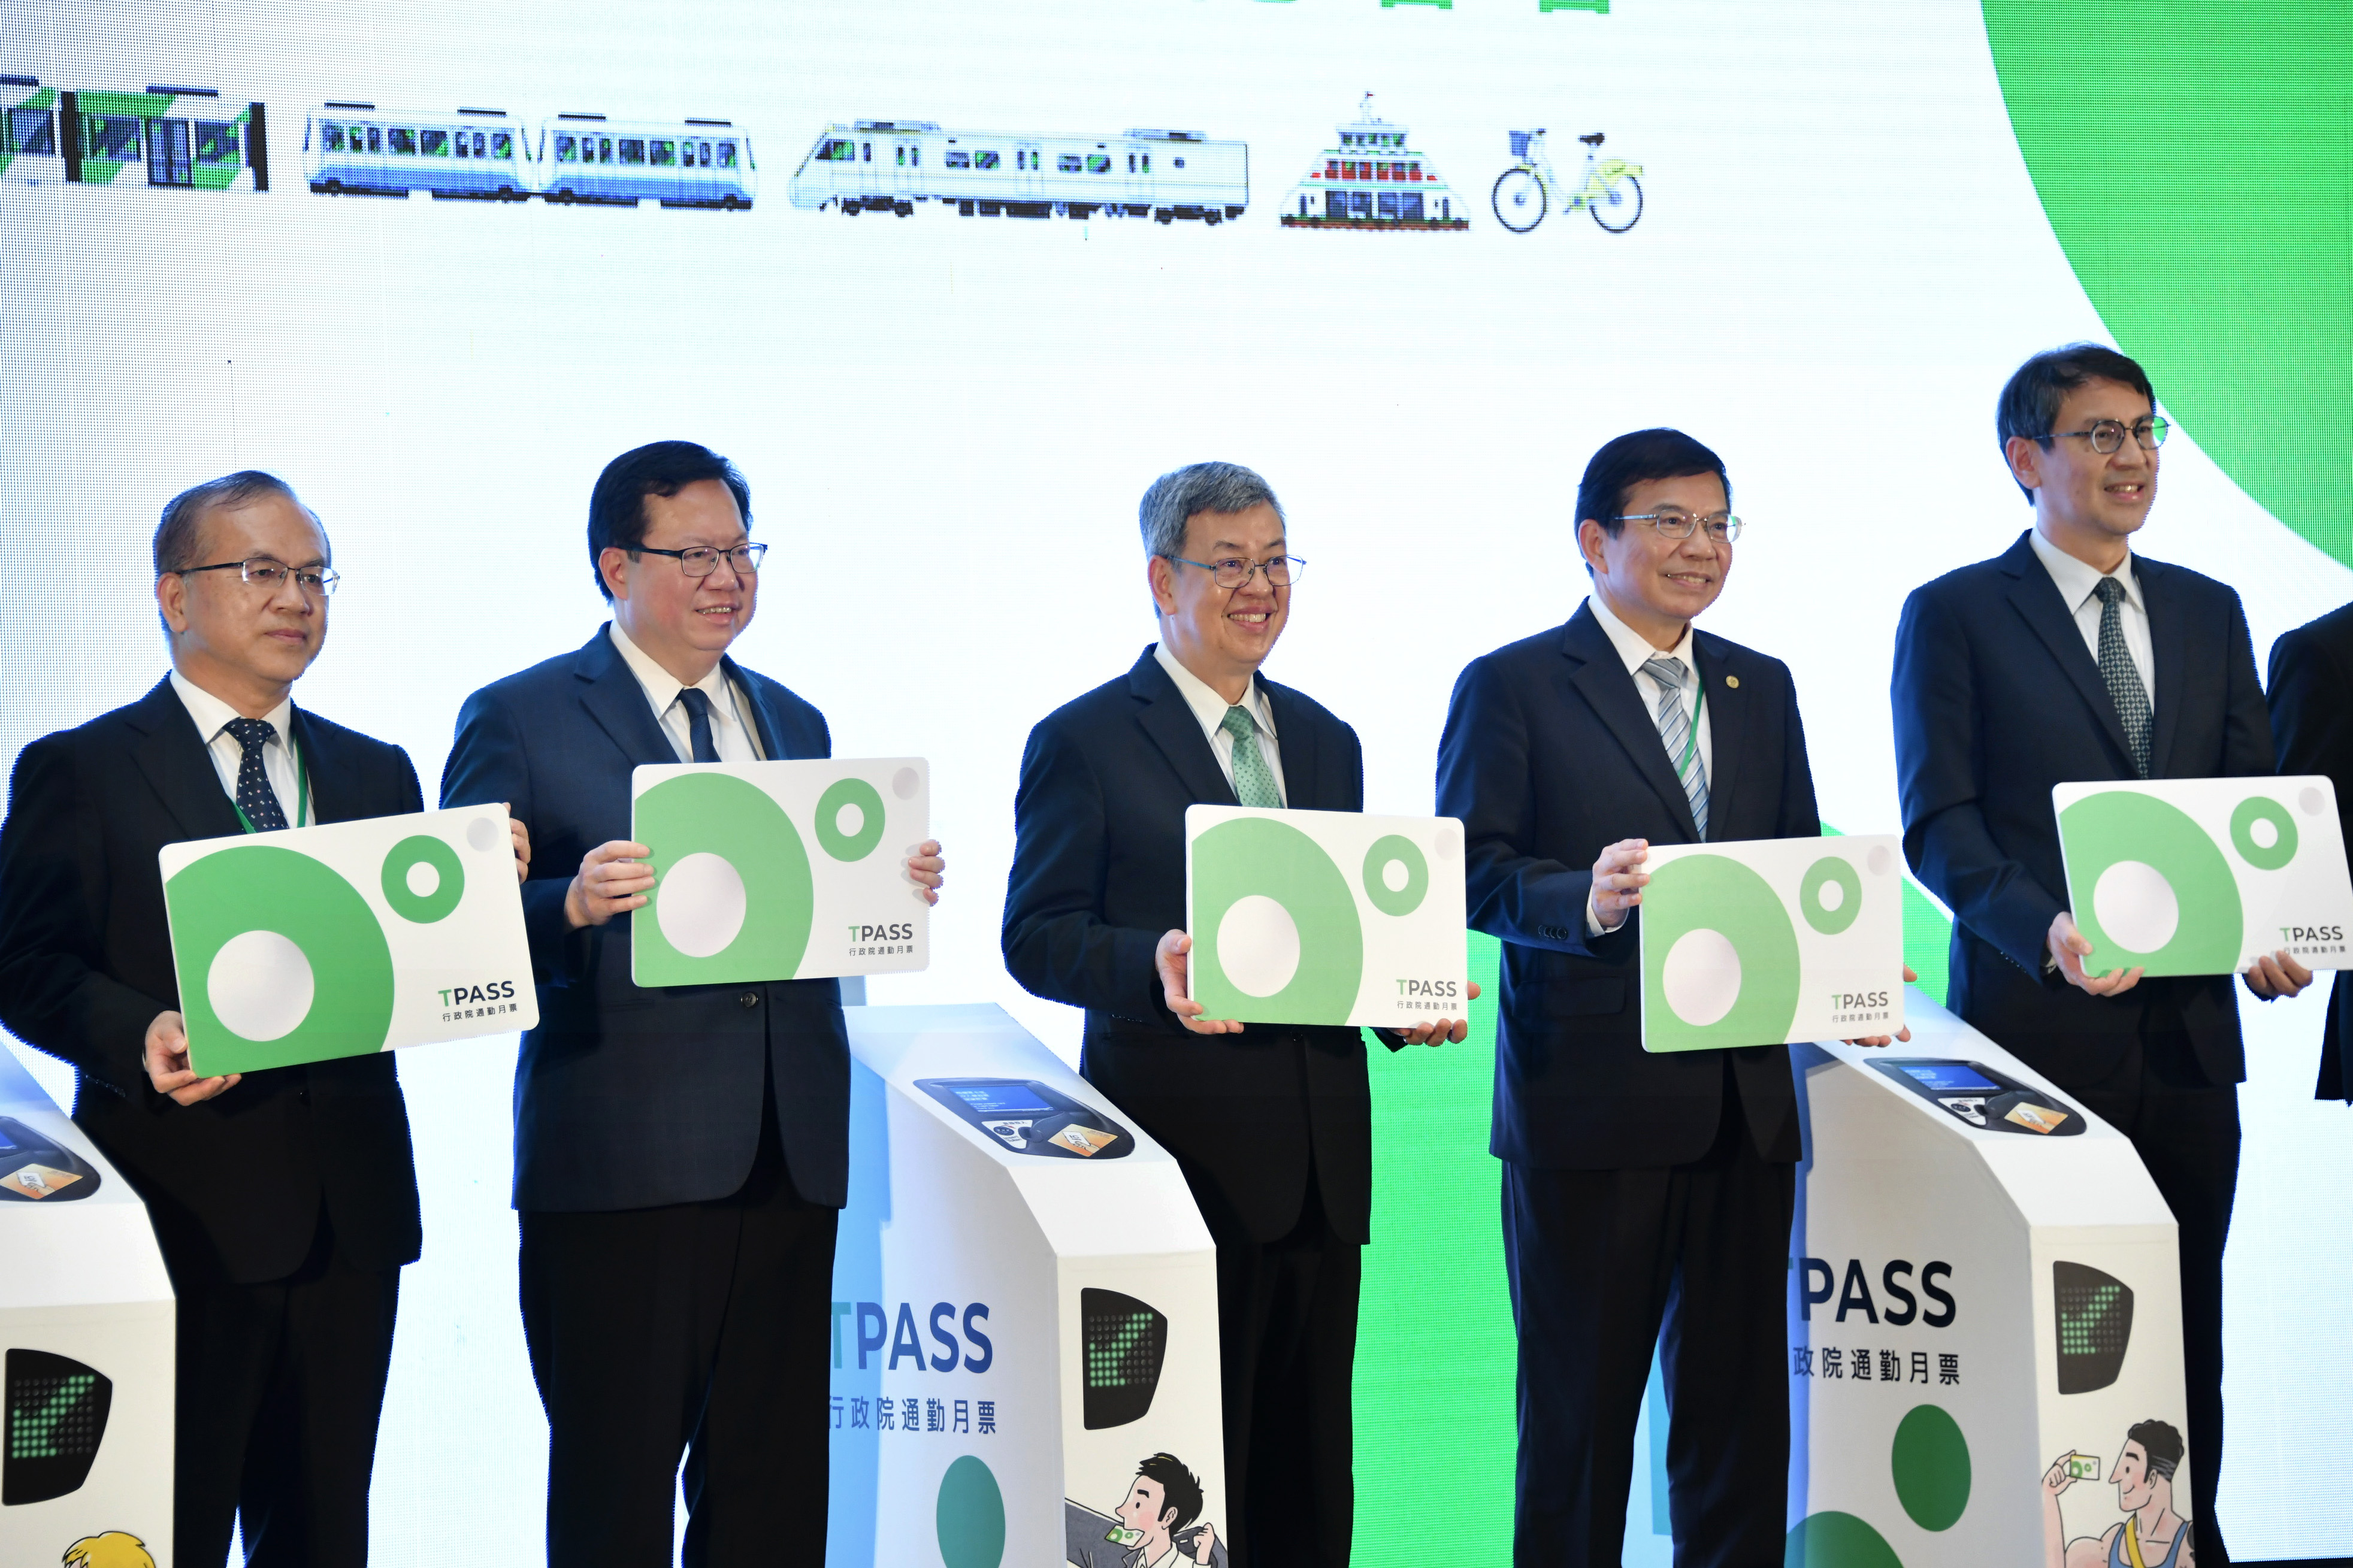 Premier Chen attends a press conference to promote the TPASS commuter travel card